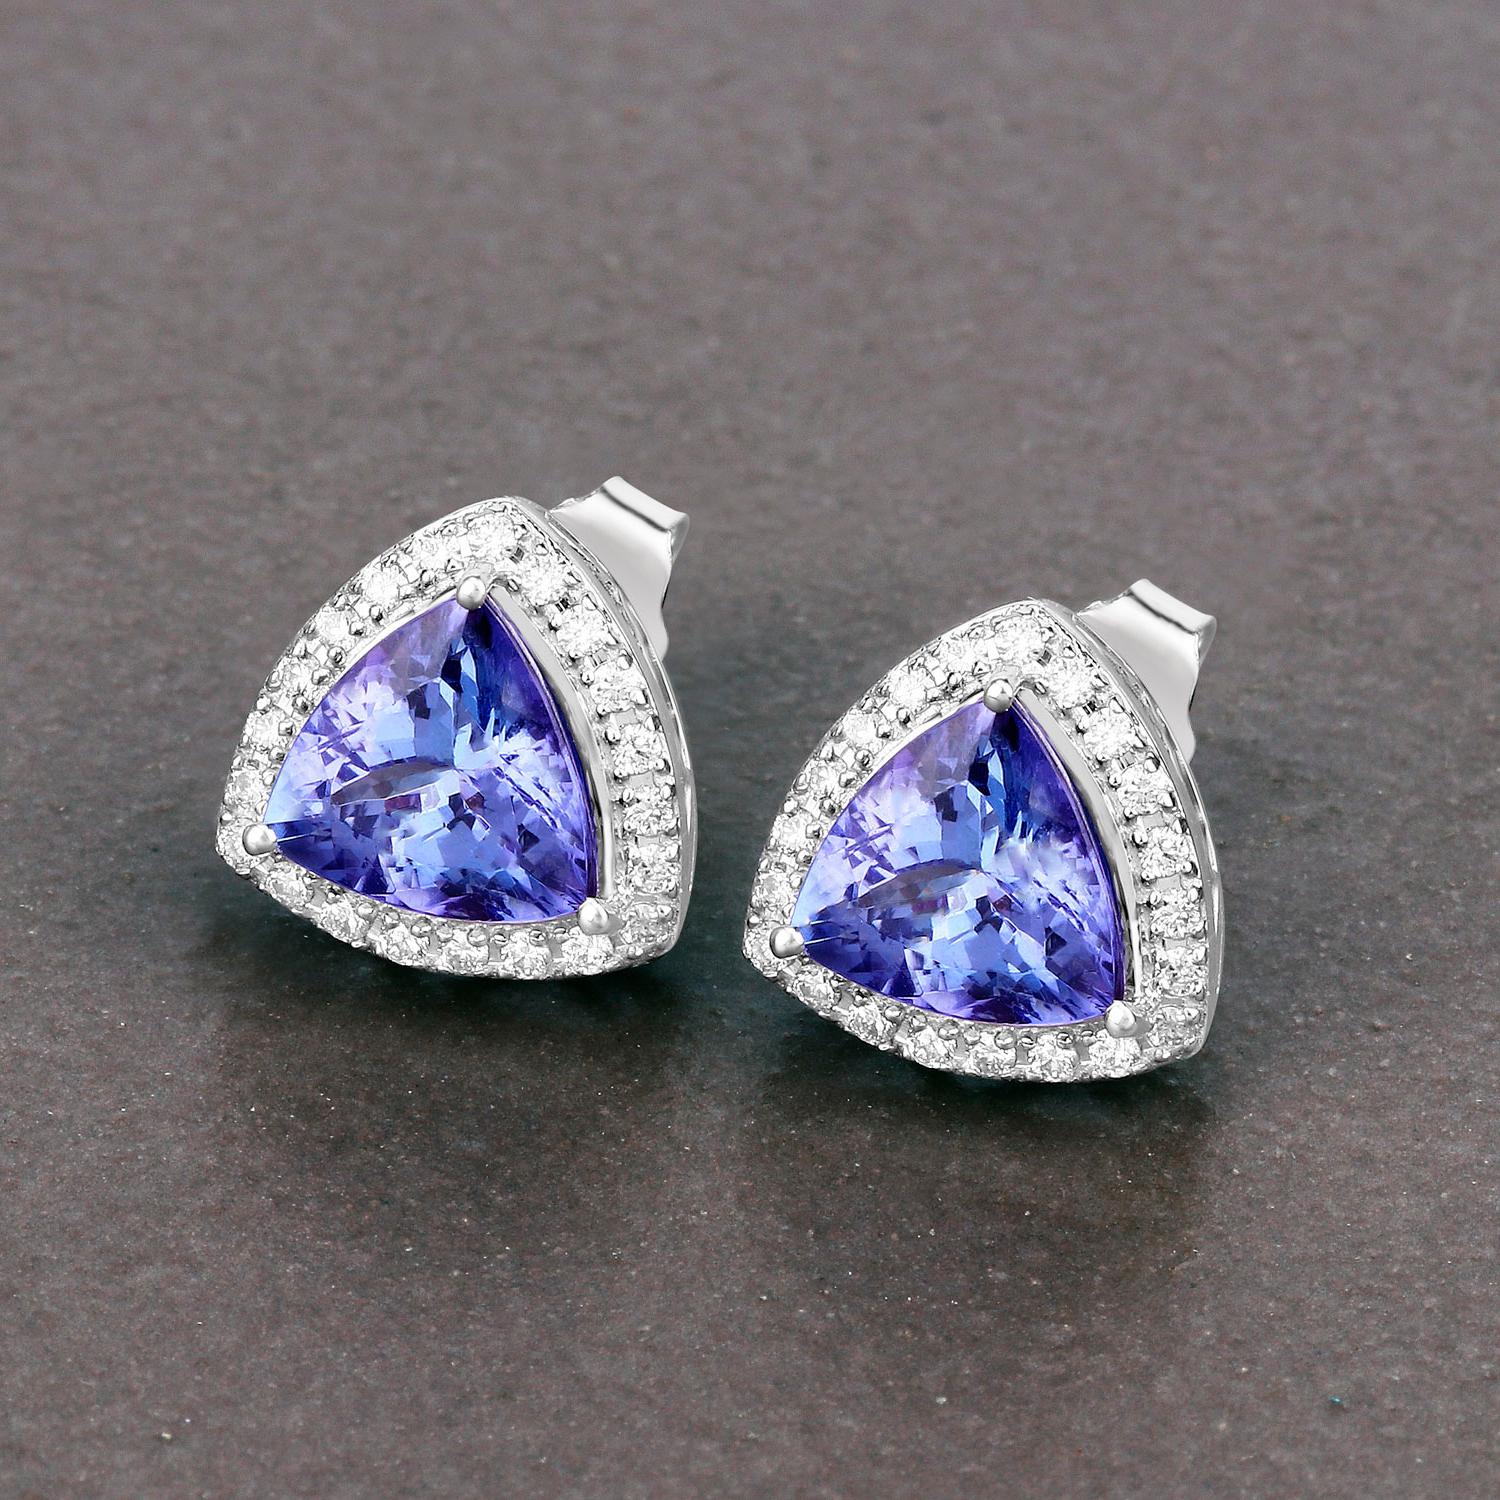 Trillion Cut Tanzanite Stud Earrings With Diamonds 3.82 Carats 14K White Gold For Sale